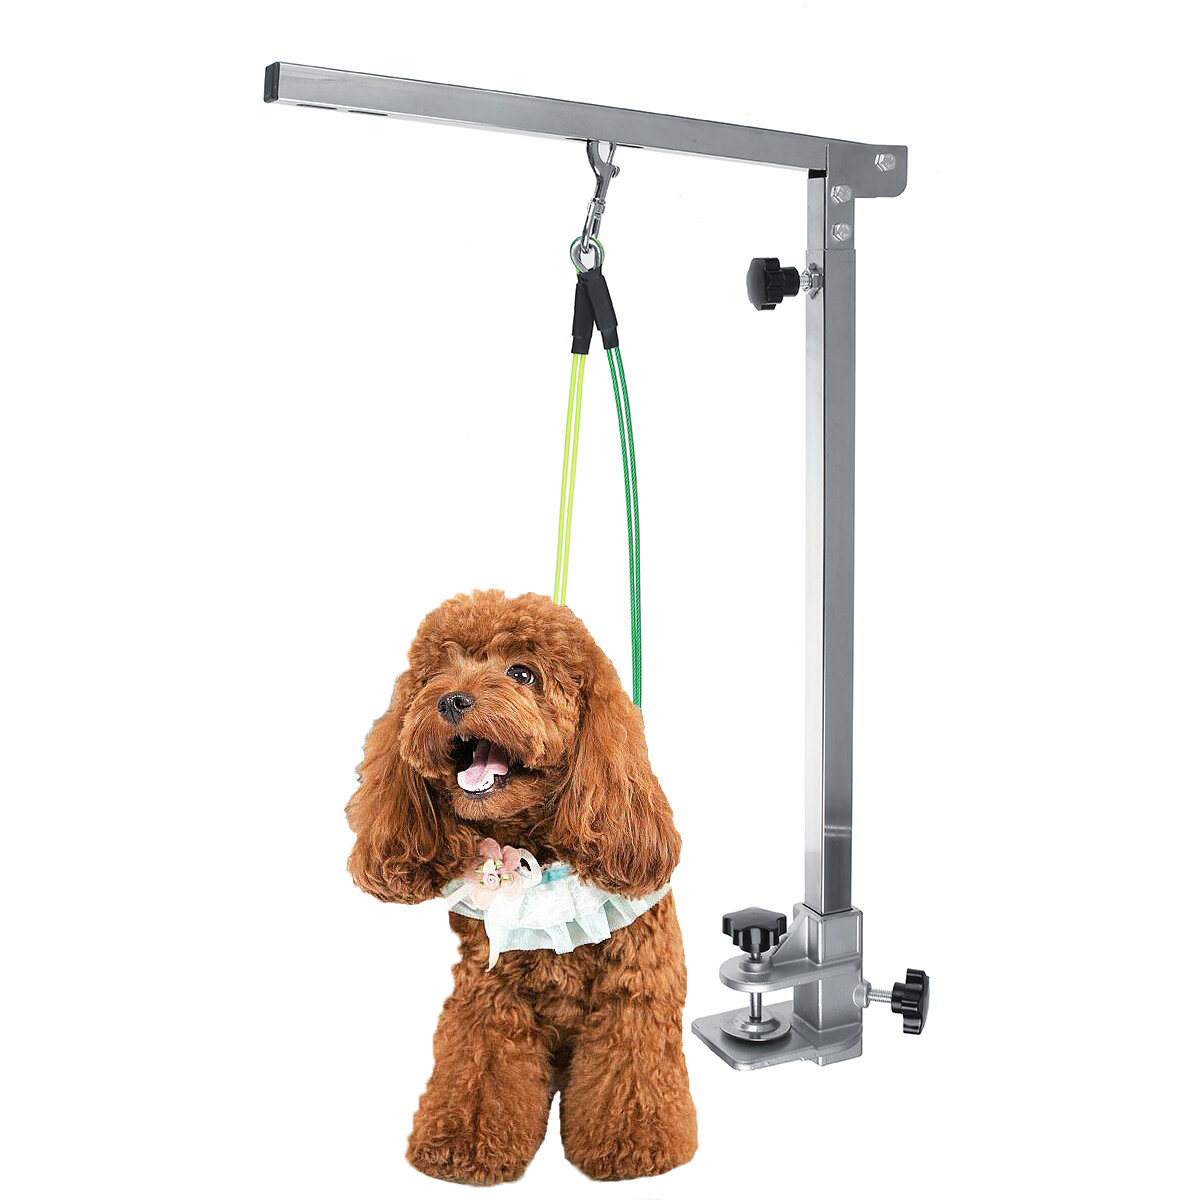 Image of Dog Grooming Table Arm for Pet Bath Beauty Aids Desk Portable Puppy Supplies Adjustable Cat Standing Training Foldable